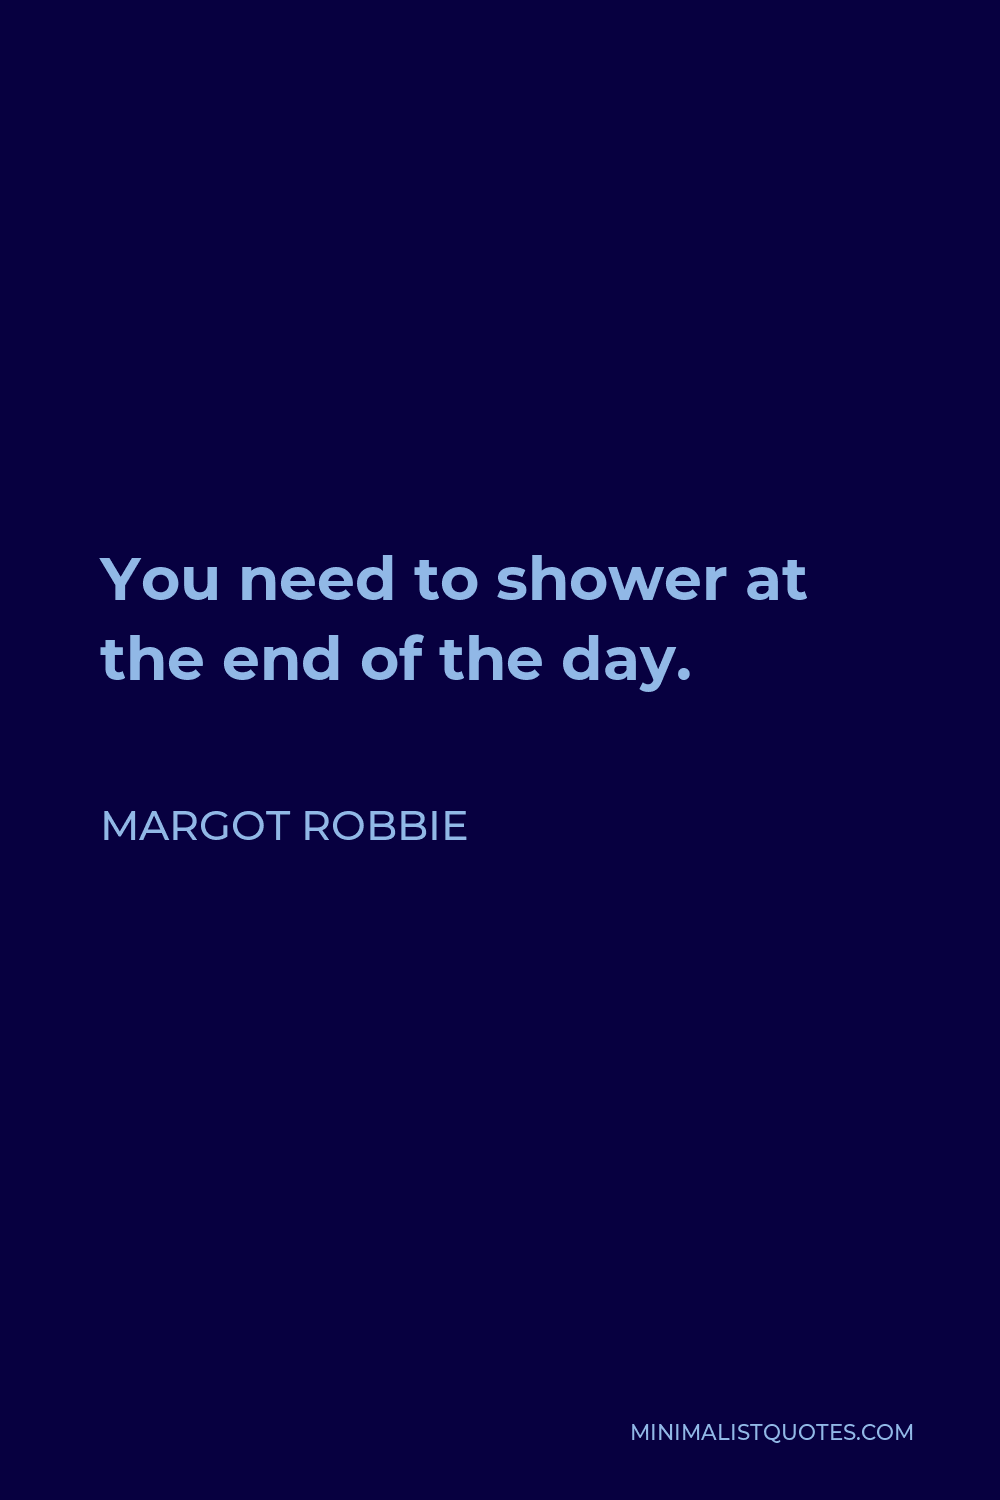 Margot Robbie Quote - You need to shower at the end of the day.